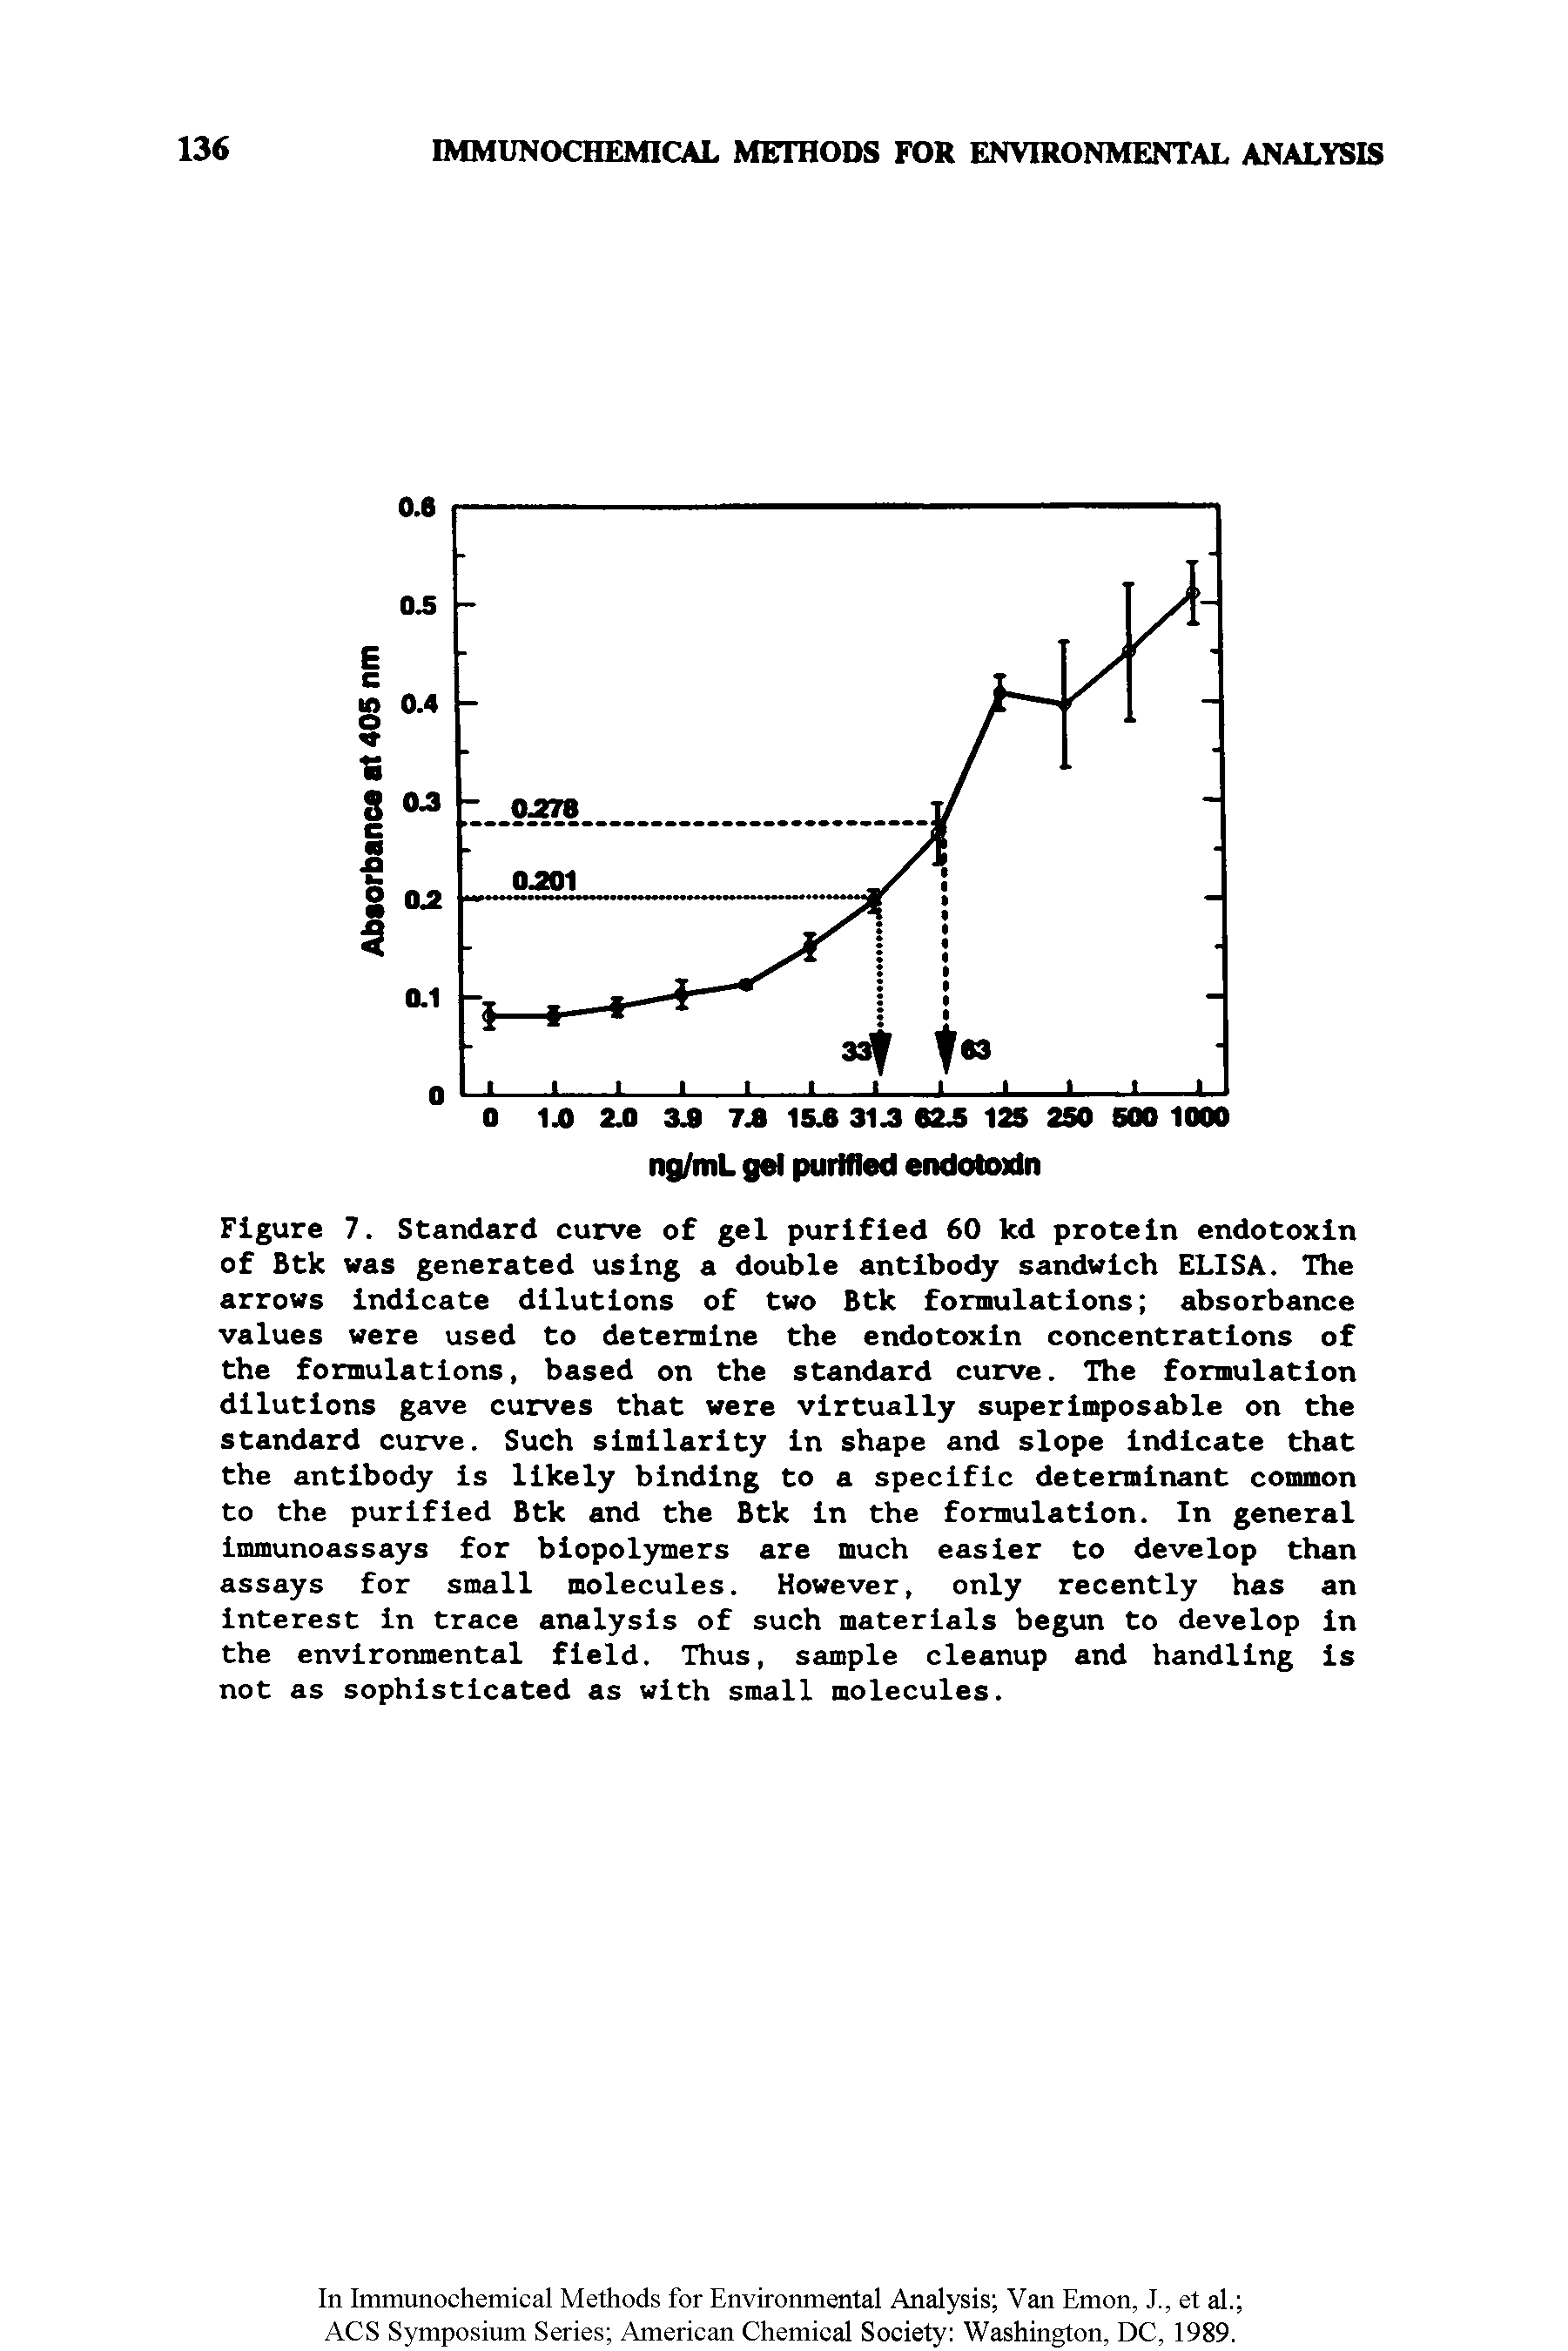 Figure 7. Standard curve of gel purified 60 kd protein endotoxin of Btk was generated using a double antibody sandwich ELISA. The arrows indicate dilutions of two Btk formulations absorbance values were used to determine the endotoxin concentrations of the formulations, based on the standard curve. The formulation dilutions gave curves that were virtually superimposable on the standard curve. Such similarity in shape and slope indicate that the antibody is likely binding to a specific determinant common to the purified Btk and the Btk in the formulation. In general immunoassays for biopolymers are much easier to develop than assays for small molecules. However, only recently has an interest in trace analysis of such materials begun to develop in the environmental field. Thus, sample cleanup and handling is not as sophisticated as with small molecules.